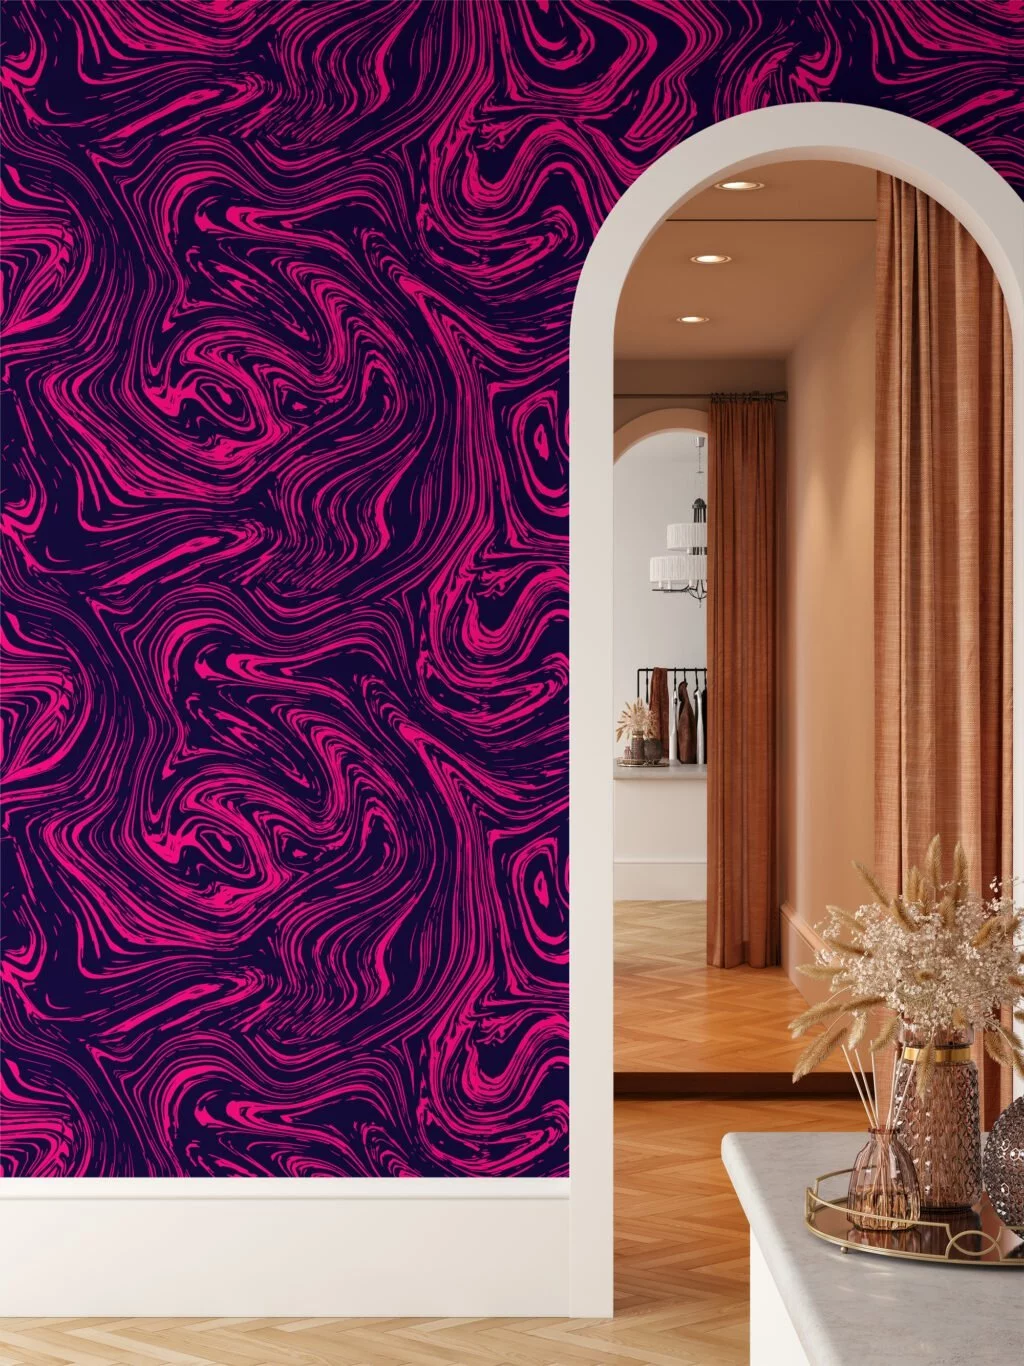 Hot Pink And Dark Purple Abstract Swirls Illustration Wallpaper, Luxurious Abstract Ink Design Peel & Stick Wall Mural